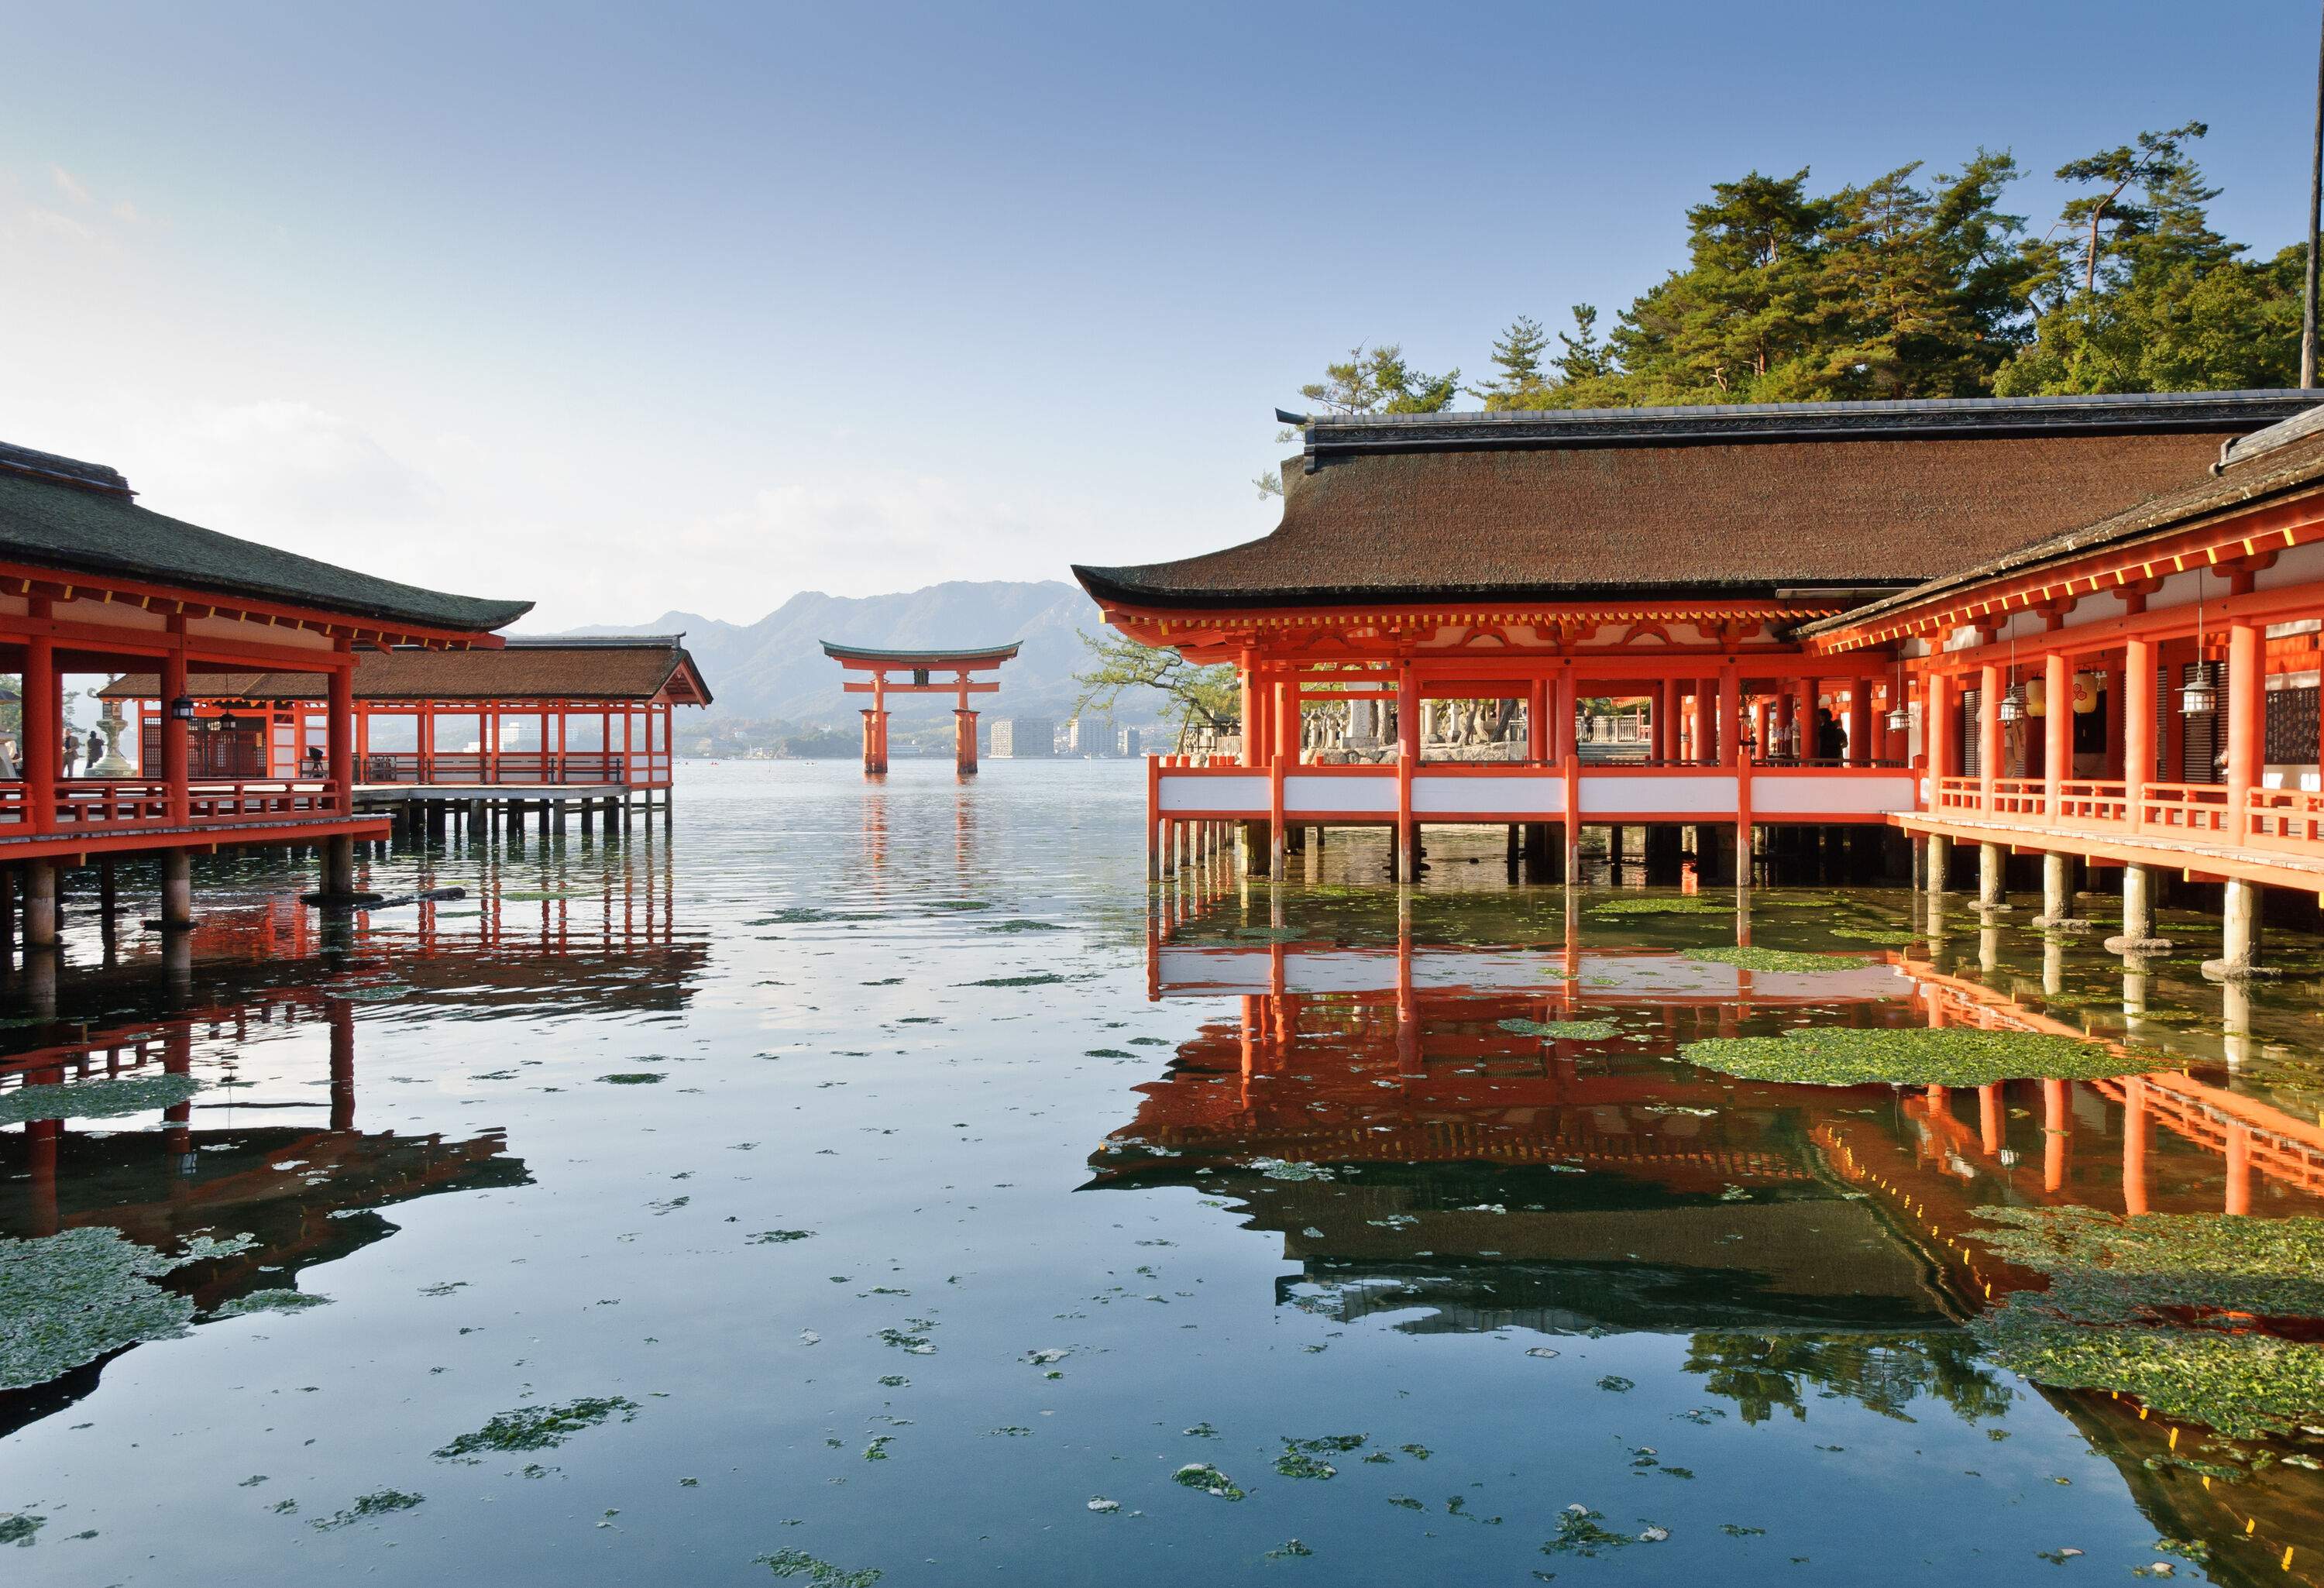 The iconic Itsukushima Shrine in Japan stands gracefully on stilts, reflecting its grandeur against the tranquil waters.